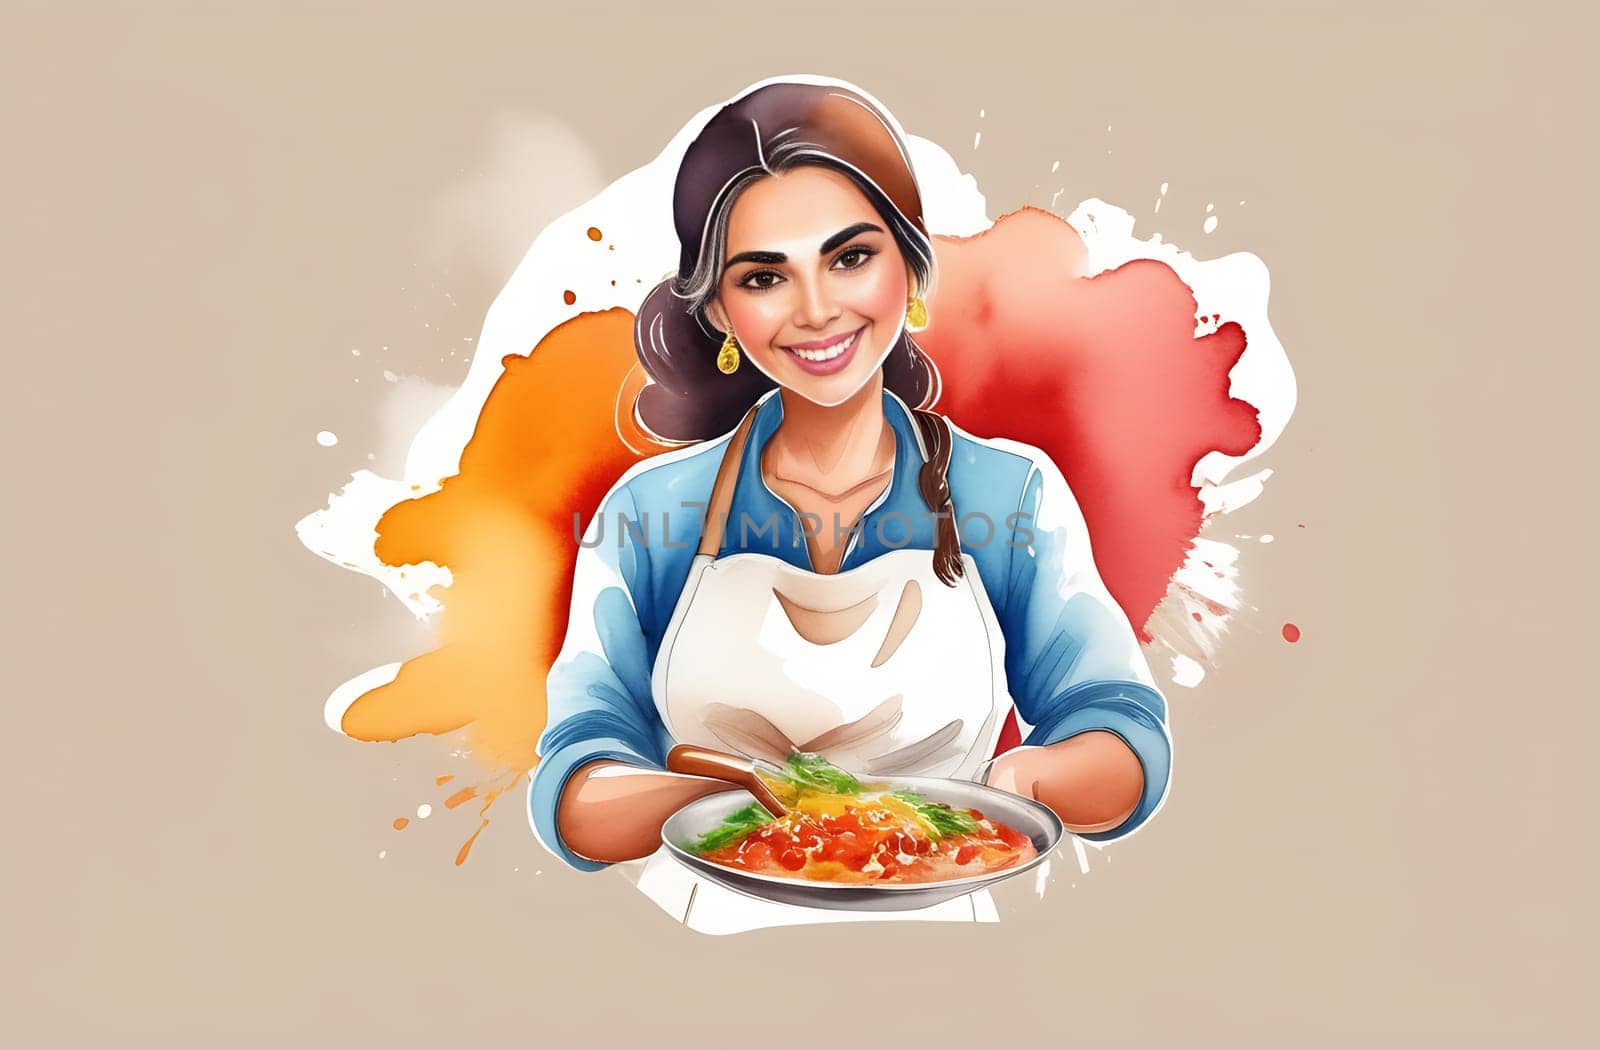 Smiling sweet Mexican woman presents Latin American cuisine, illustration style by claire_lucia